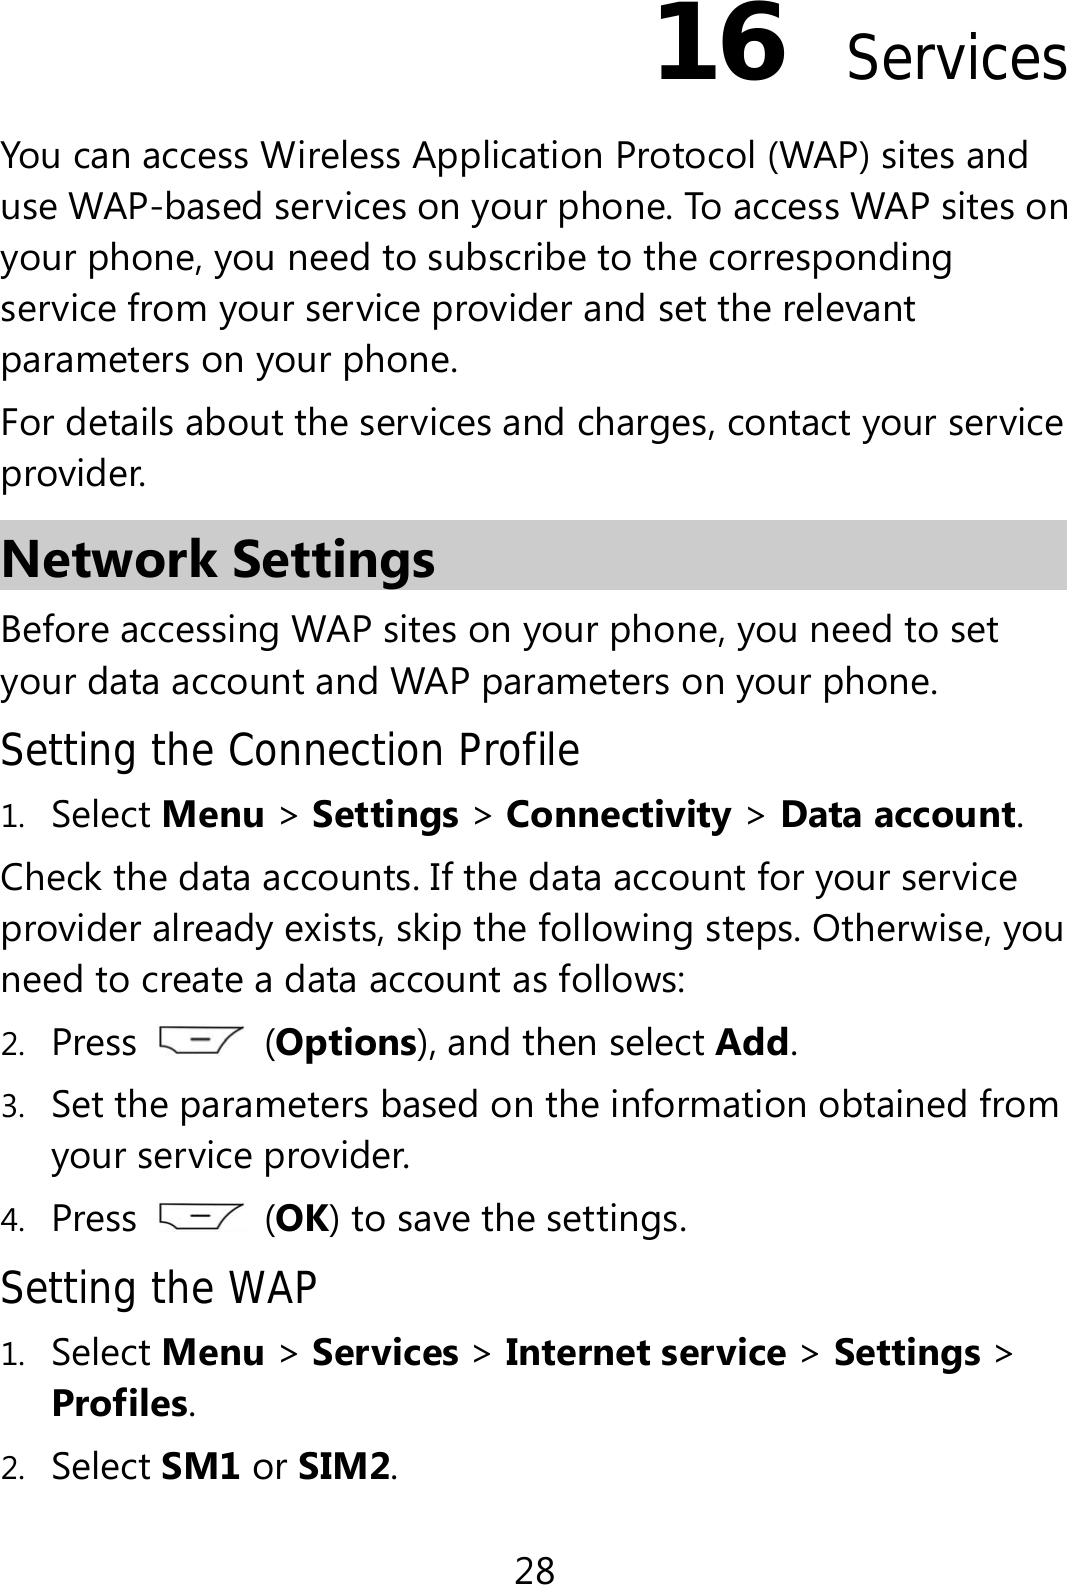 28 16  Services You can access Wireless Application Protocol (WAP) sites and use WAP-based services on your phone. To access WAP sites on your phone, you need to subscribe to the corresponding service from your service provider and set the relevant parameters on your phone.   For details about the services and charges, contact your service provider. Network Settings Before accessing WAP sites on your phone, you need to set your data account and WAP parameters on your phone. Setting the Connection Profile 1. Select Menu &gt; Settings &gt; Connectivity &gt; Data account. Check the data accounts. If the data account for your service provider already exists, skip the following steps. Otherwise, you need to create a data account as follows: 2. Press   (Options), and then select Add.  3. Set the parameters based on the information obtained from your service provider. 4. Press   (OK) to save the settings. Setting the WAP 1. Select Menu &gt; Services &gt; Internet service &gt; Settings &gt; Profiles. 2. Select SM1 or SIM2. 